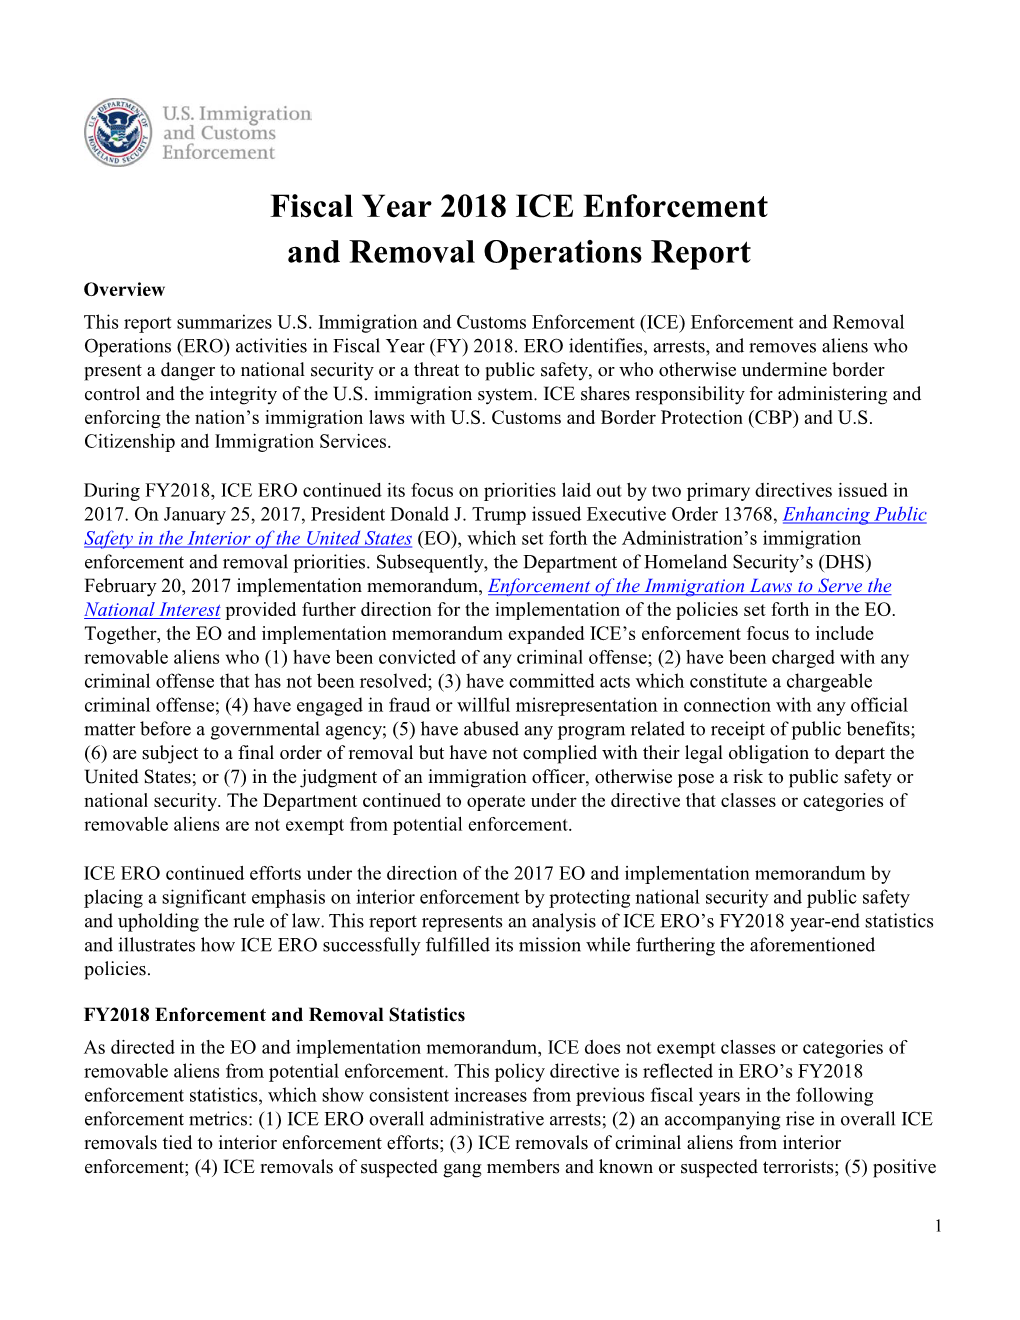 Fiscal Year 2018 ICE Enforcement and Removal Operations Report Overview This Report Summarizes U.S